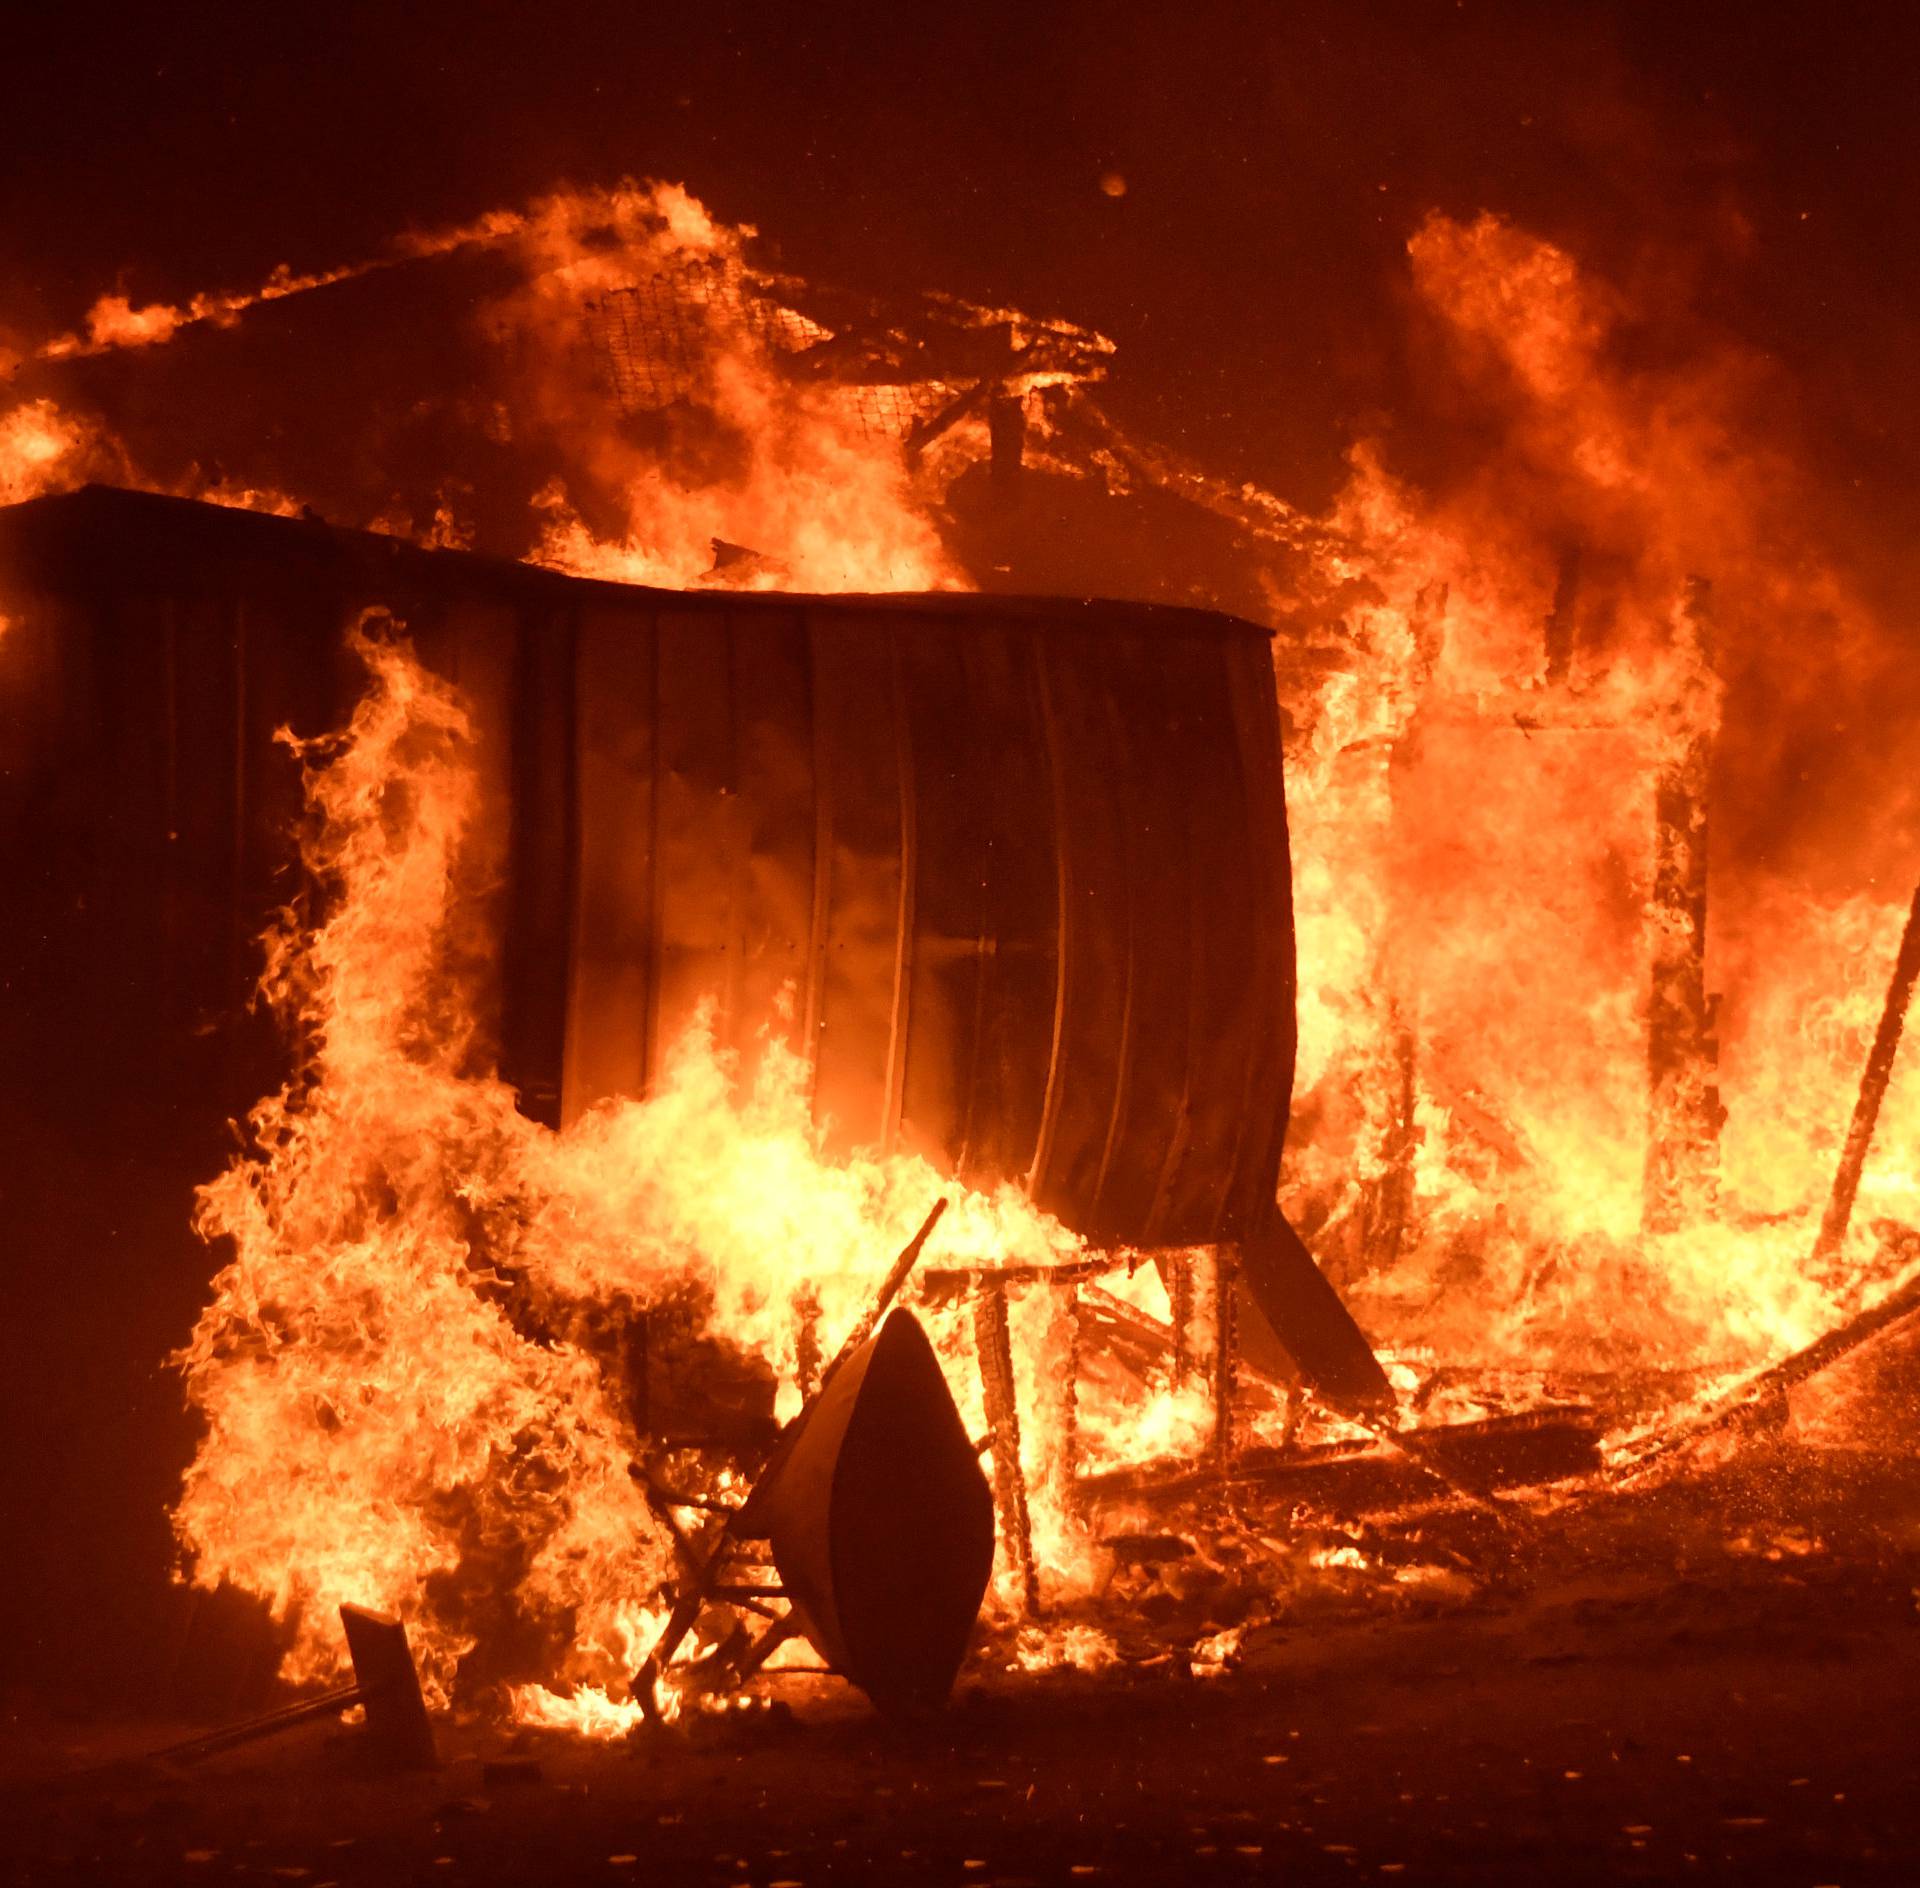 Structures burn in an early-morning Creek Fire that broke out in the Kagel Canyon area in the San Fernando Valley north of Los Angeles